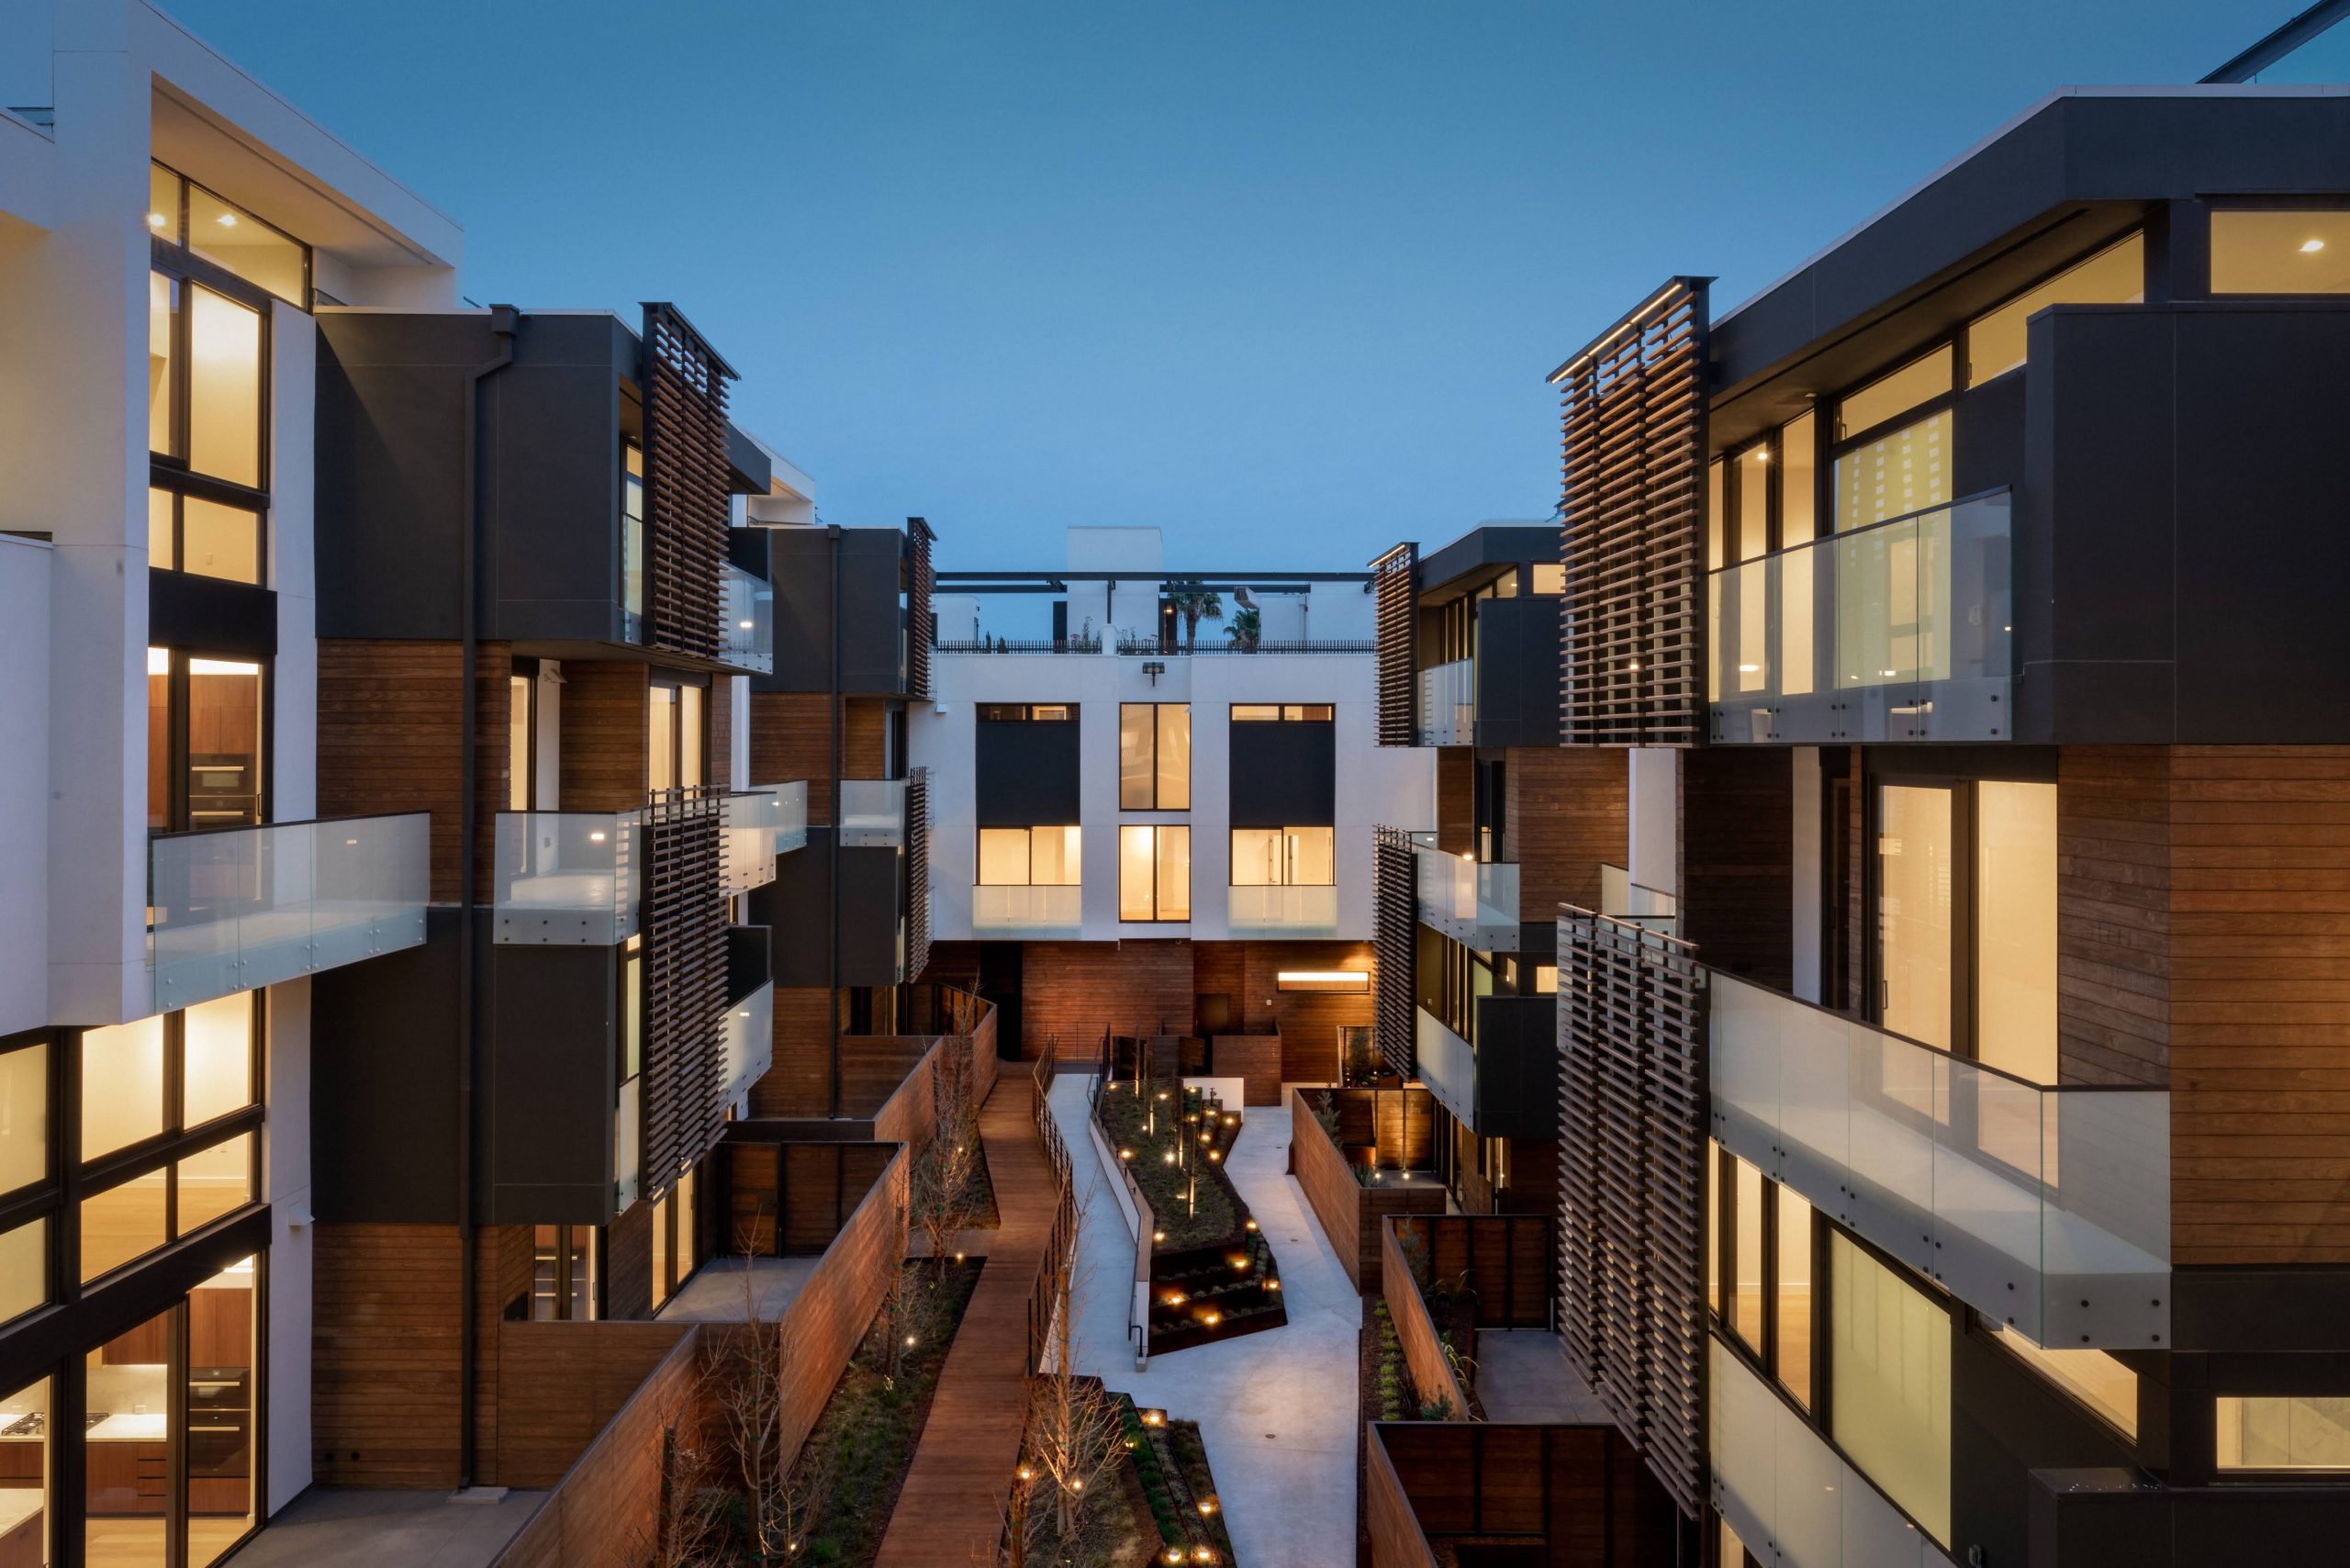 Luxury condominiums in black and wood style.